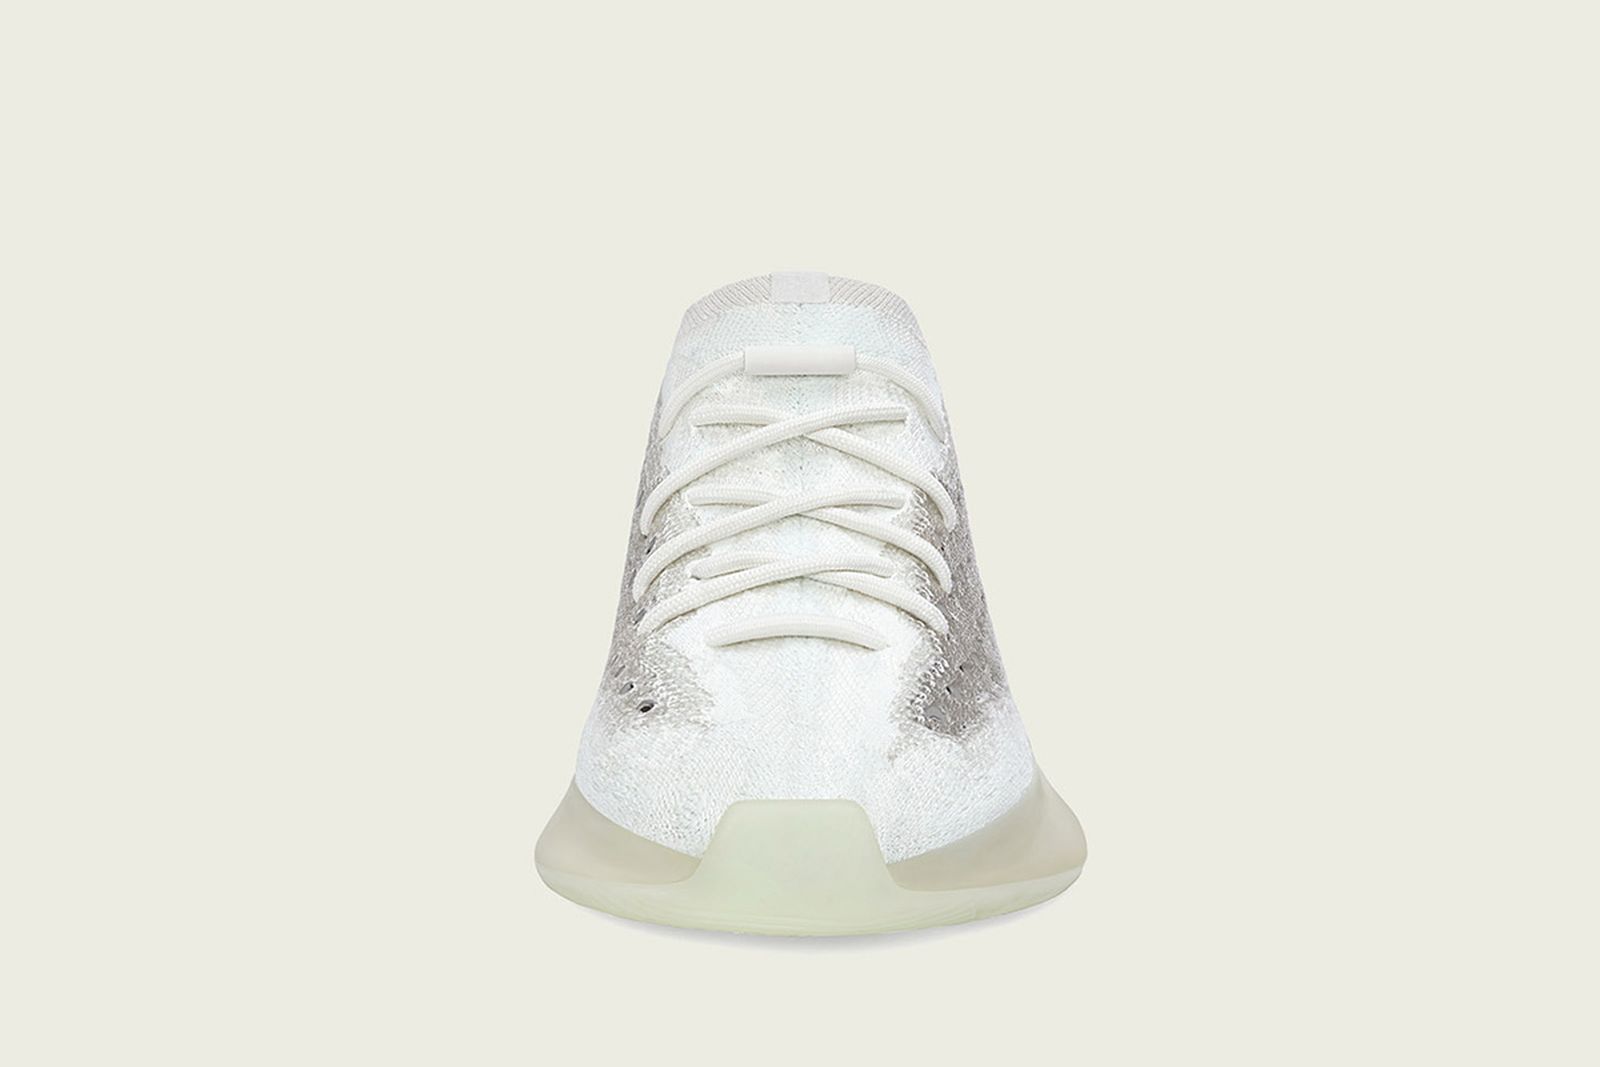 adidas-yeezy-boost-380-calcite-release-date-price-03